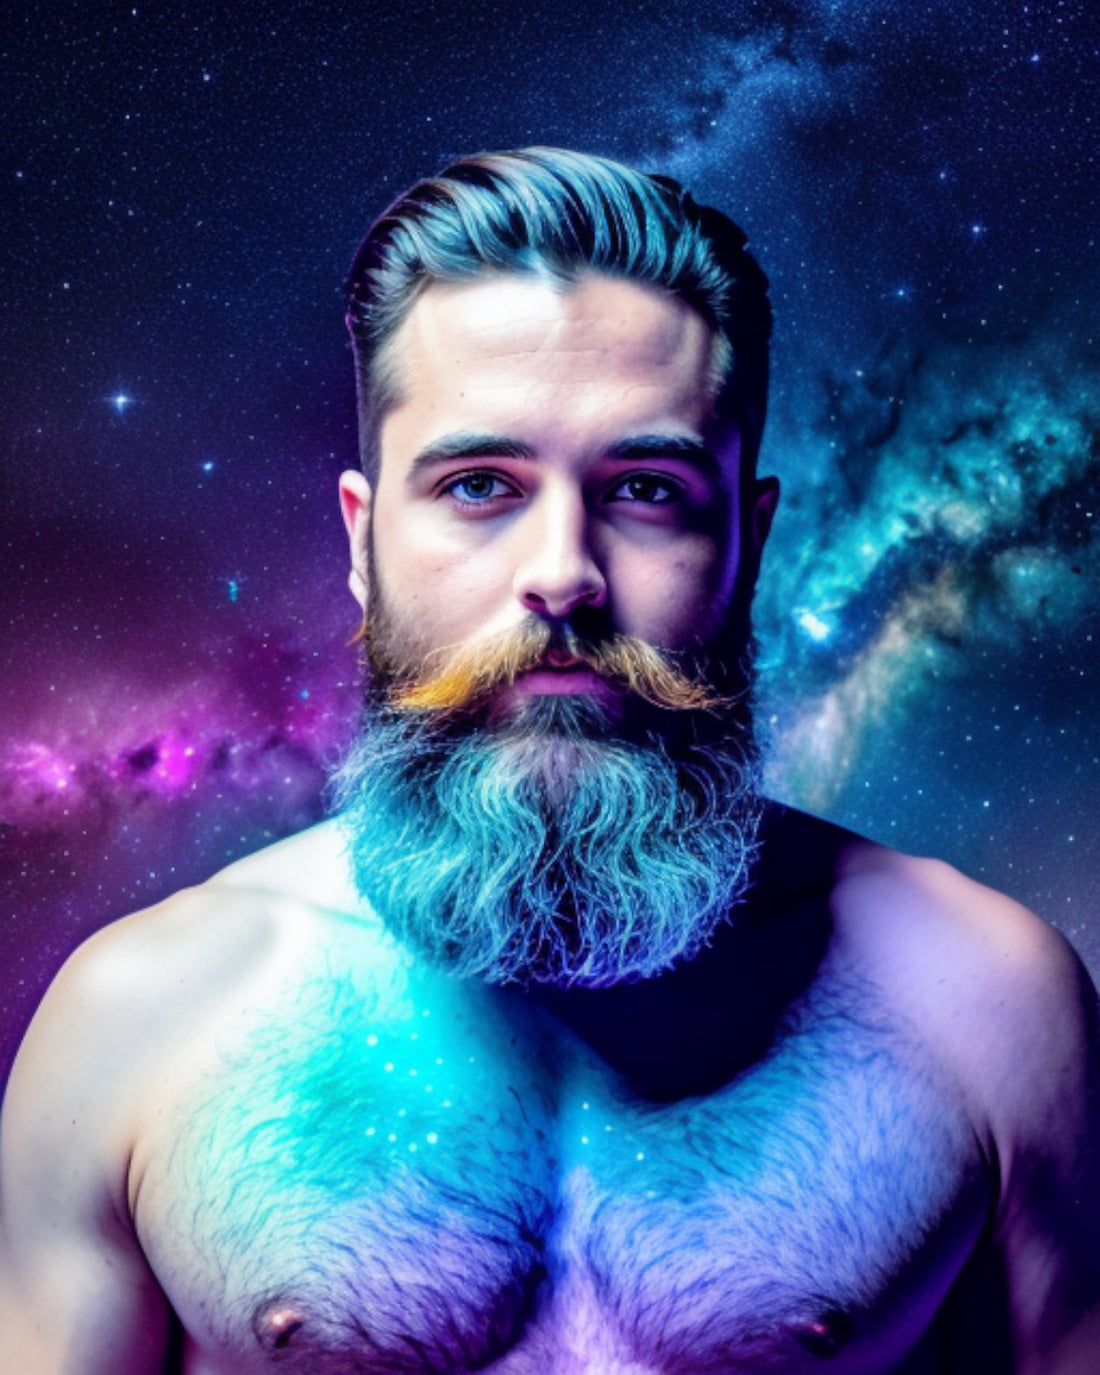 The Nebula Palace - A shirtless bearded man with colorful hair facing the viewer with starry skies in the background to symbolize spirituality and nebula healing energy.